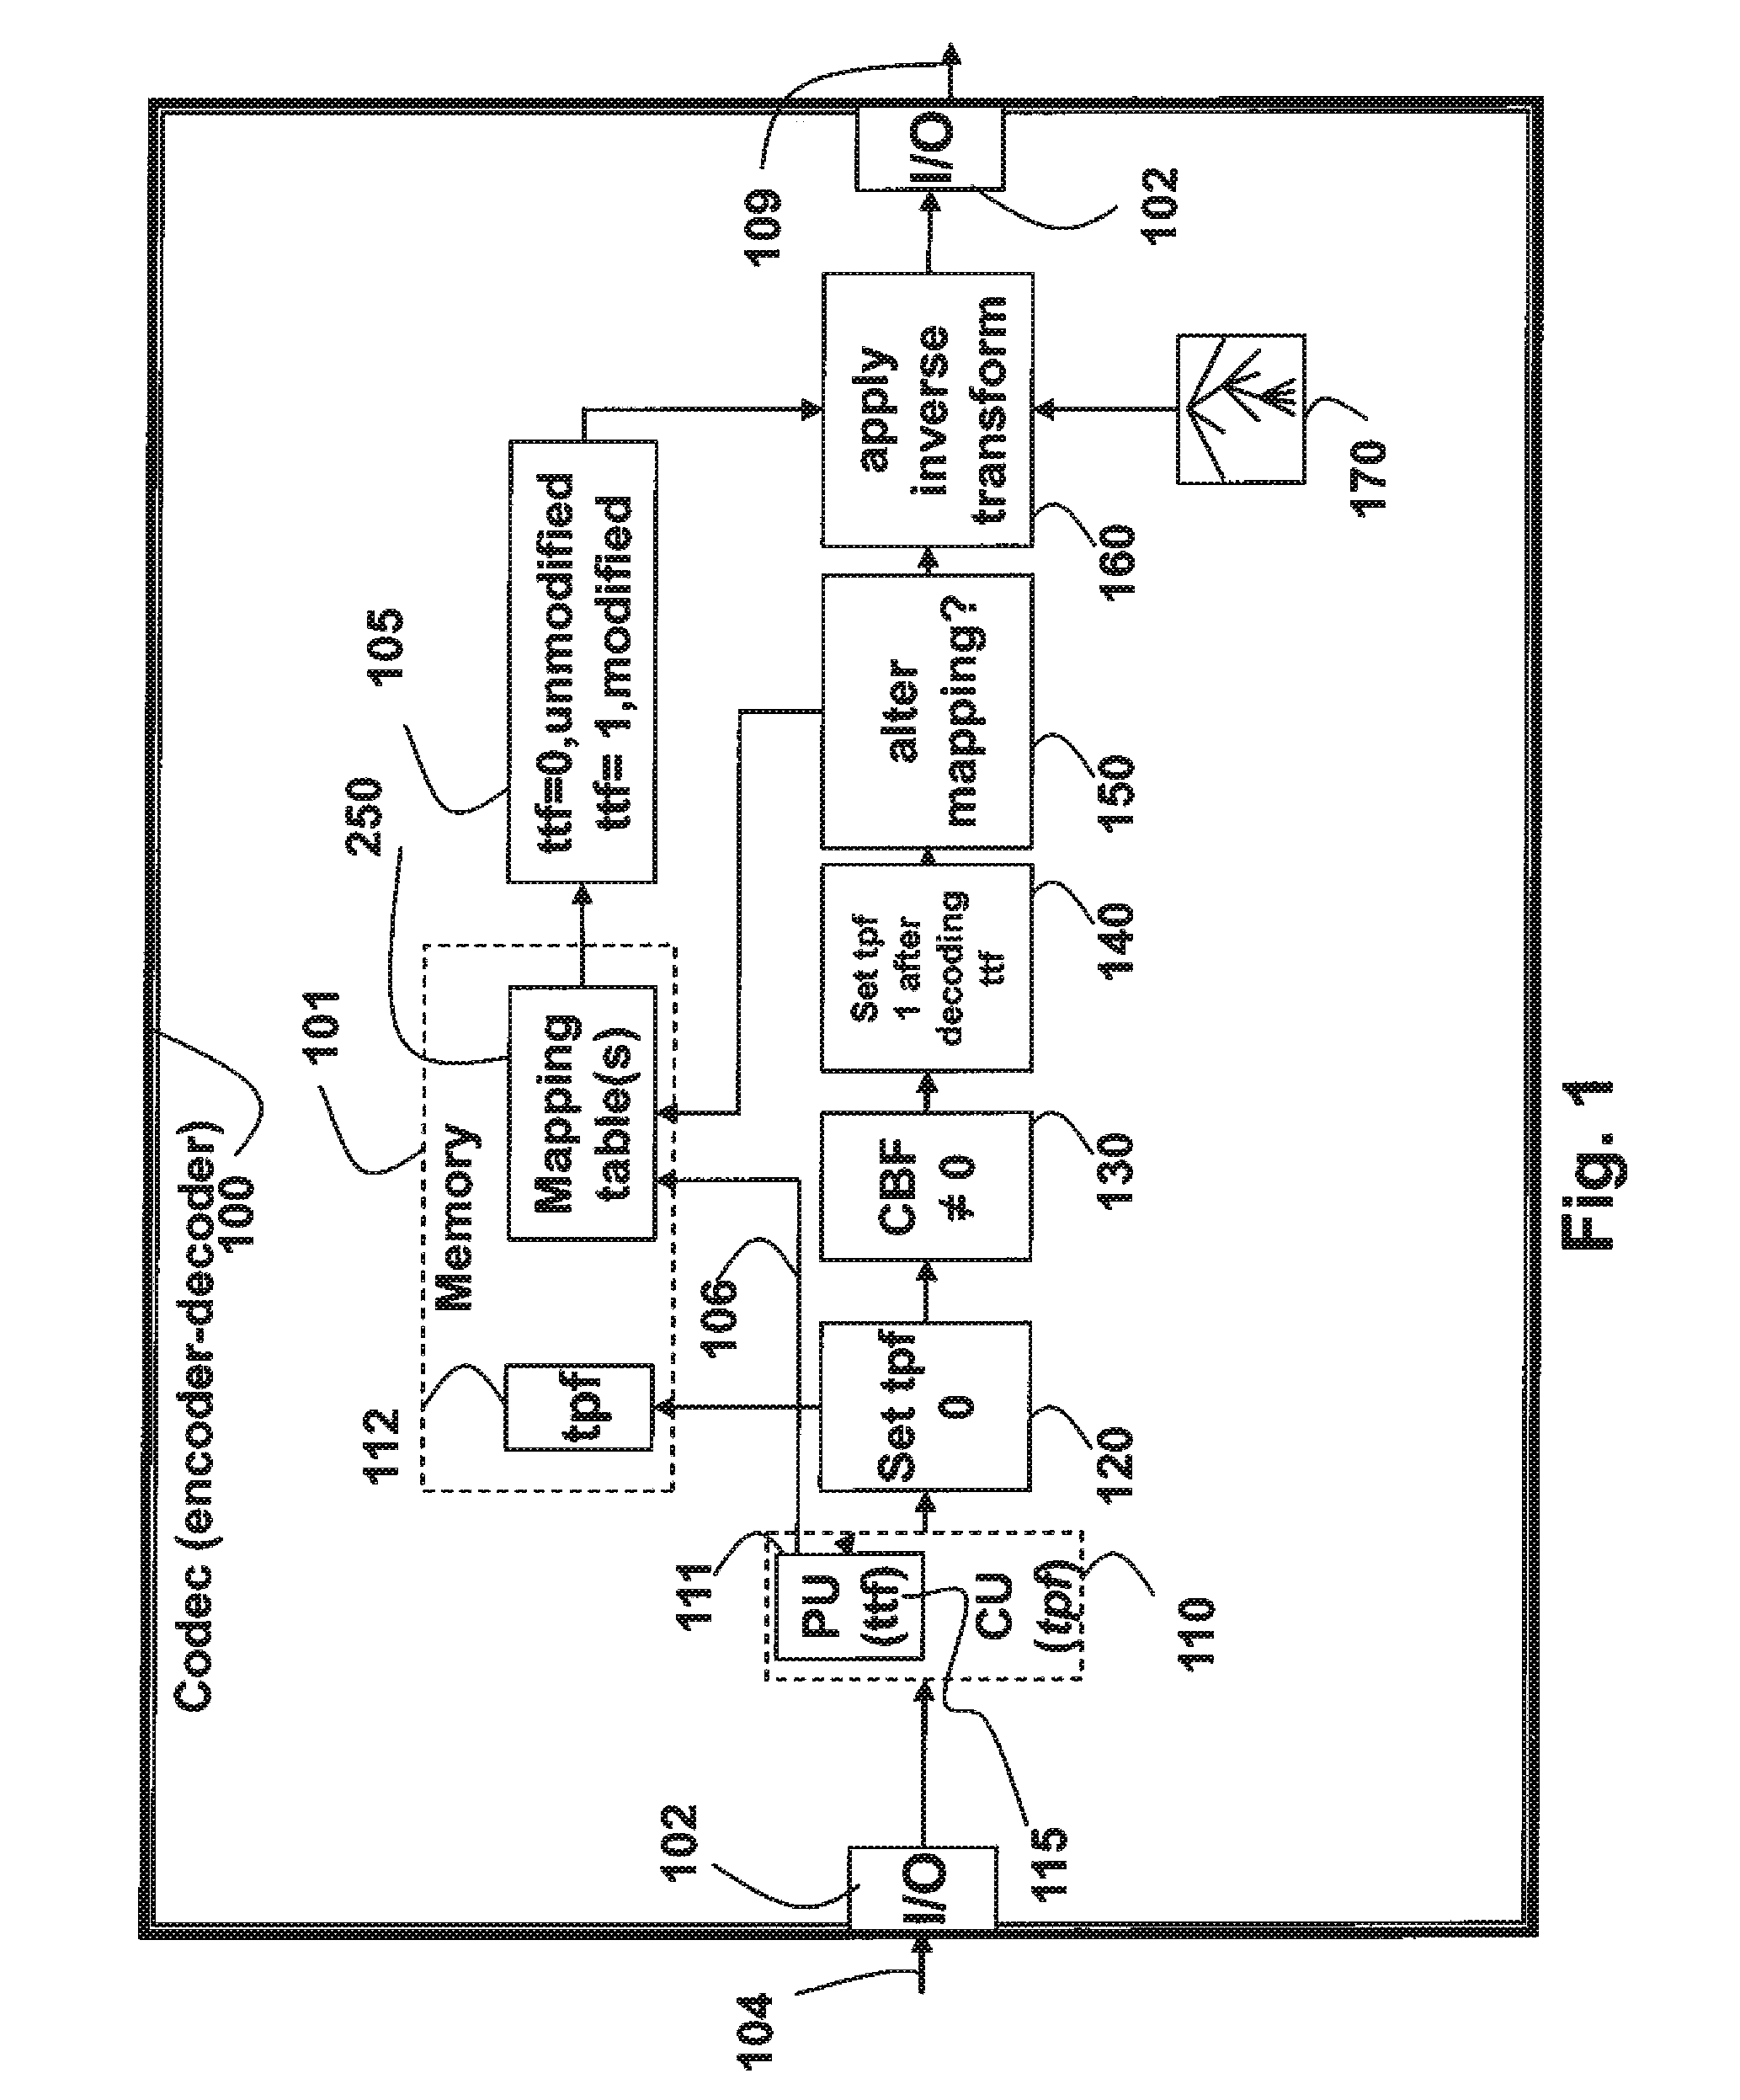 Method for Selecting Transform Types From Mapping Table for Prediction Modes